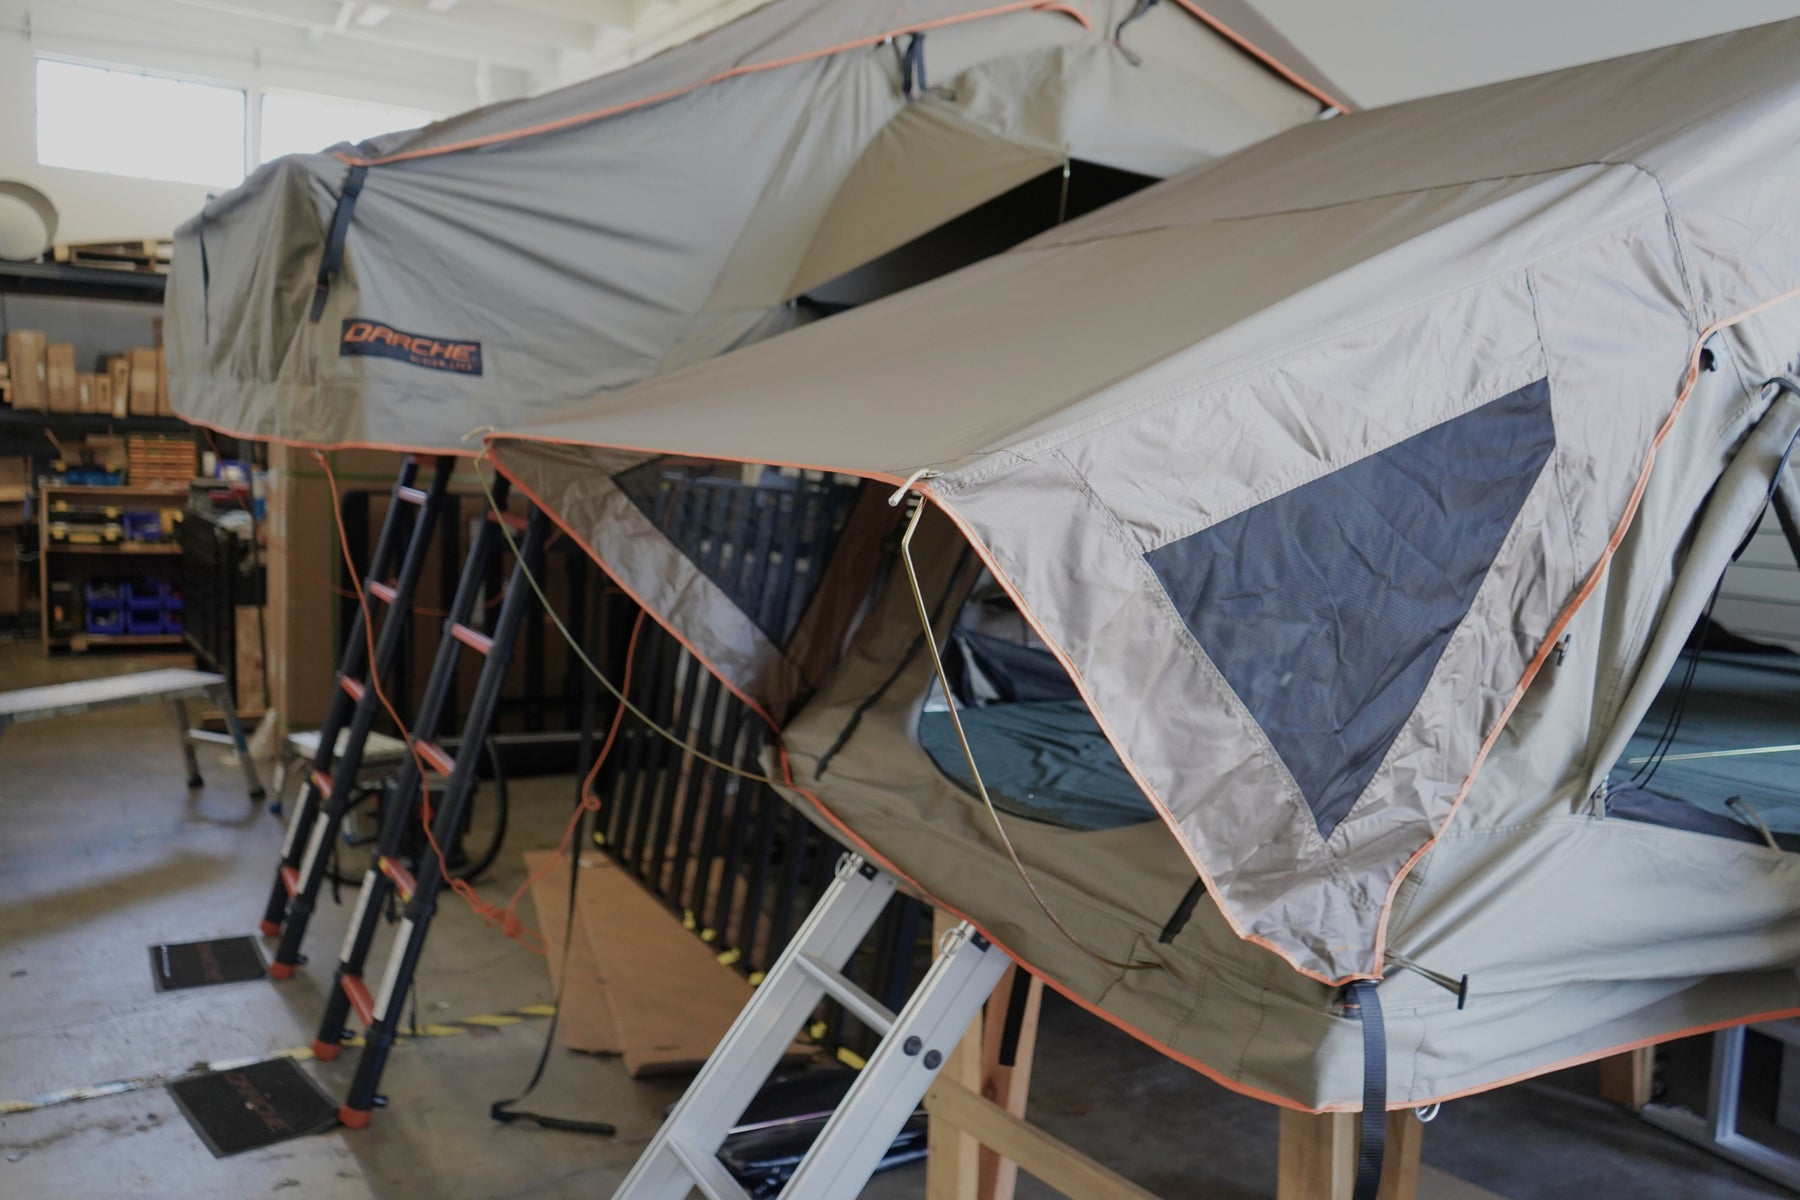 photo of roof top tents set up inside the GTFOverland shop in Long Beach California.